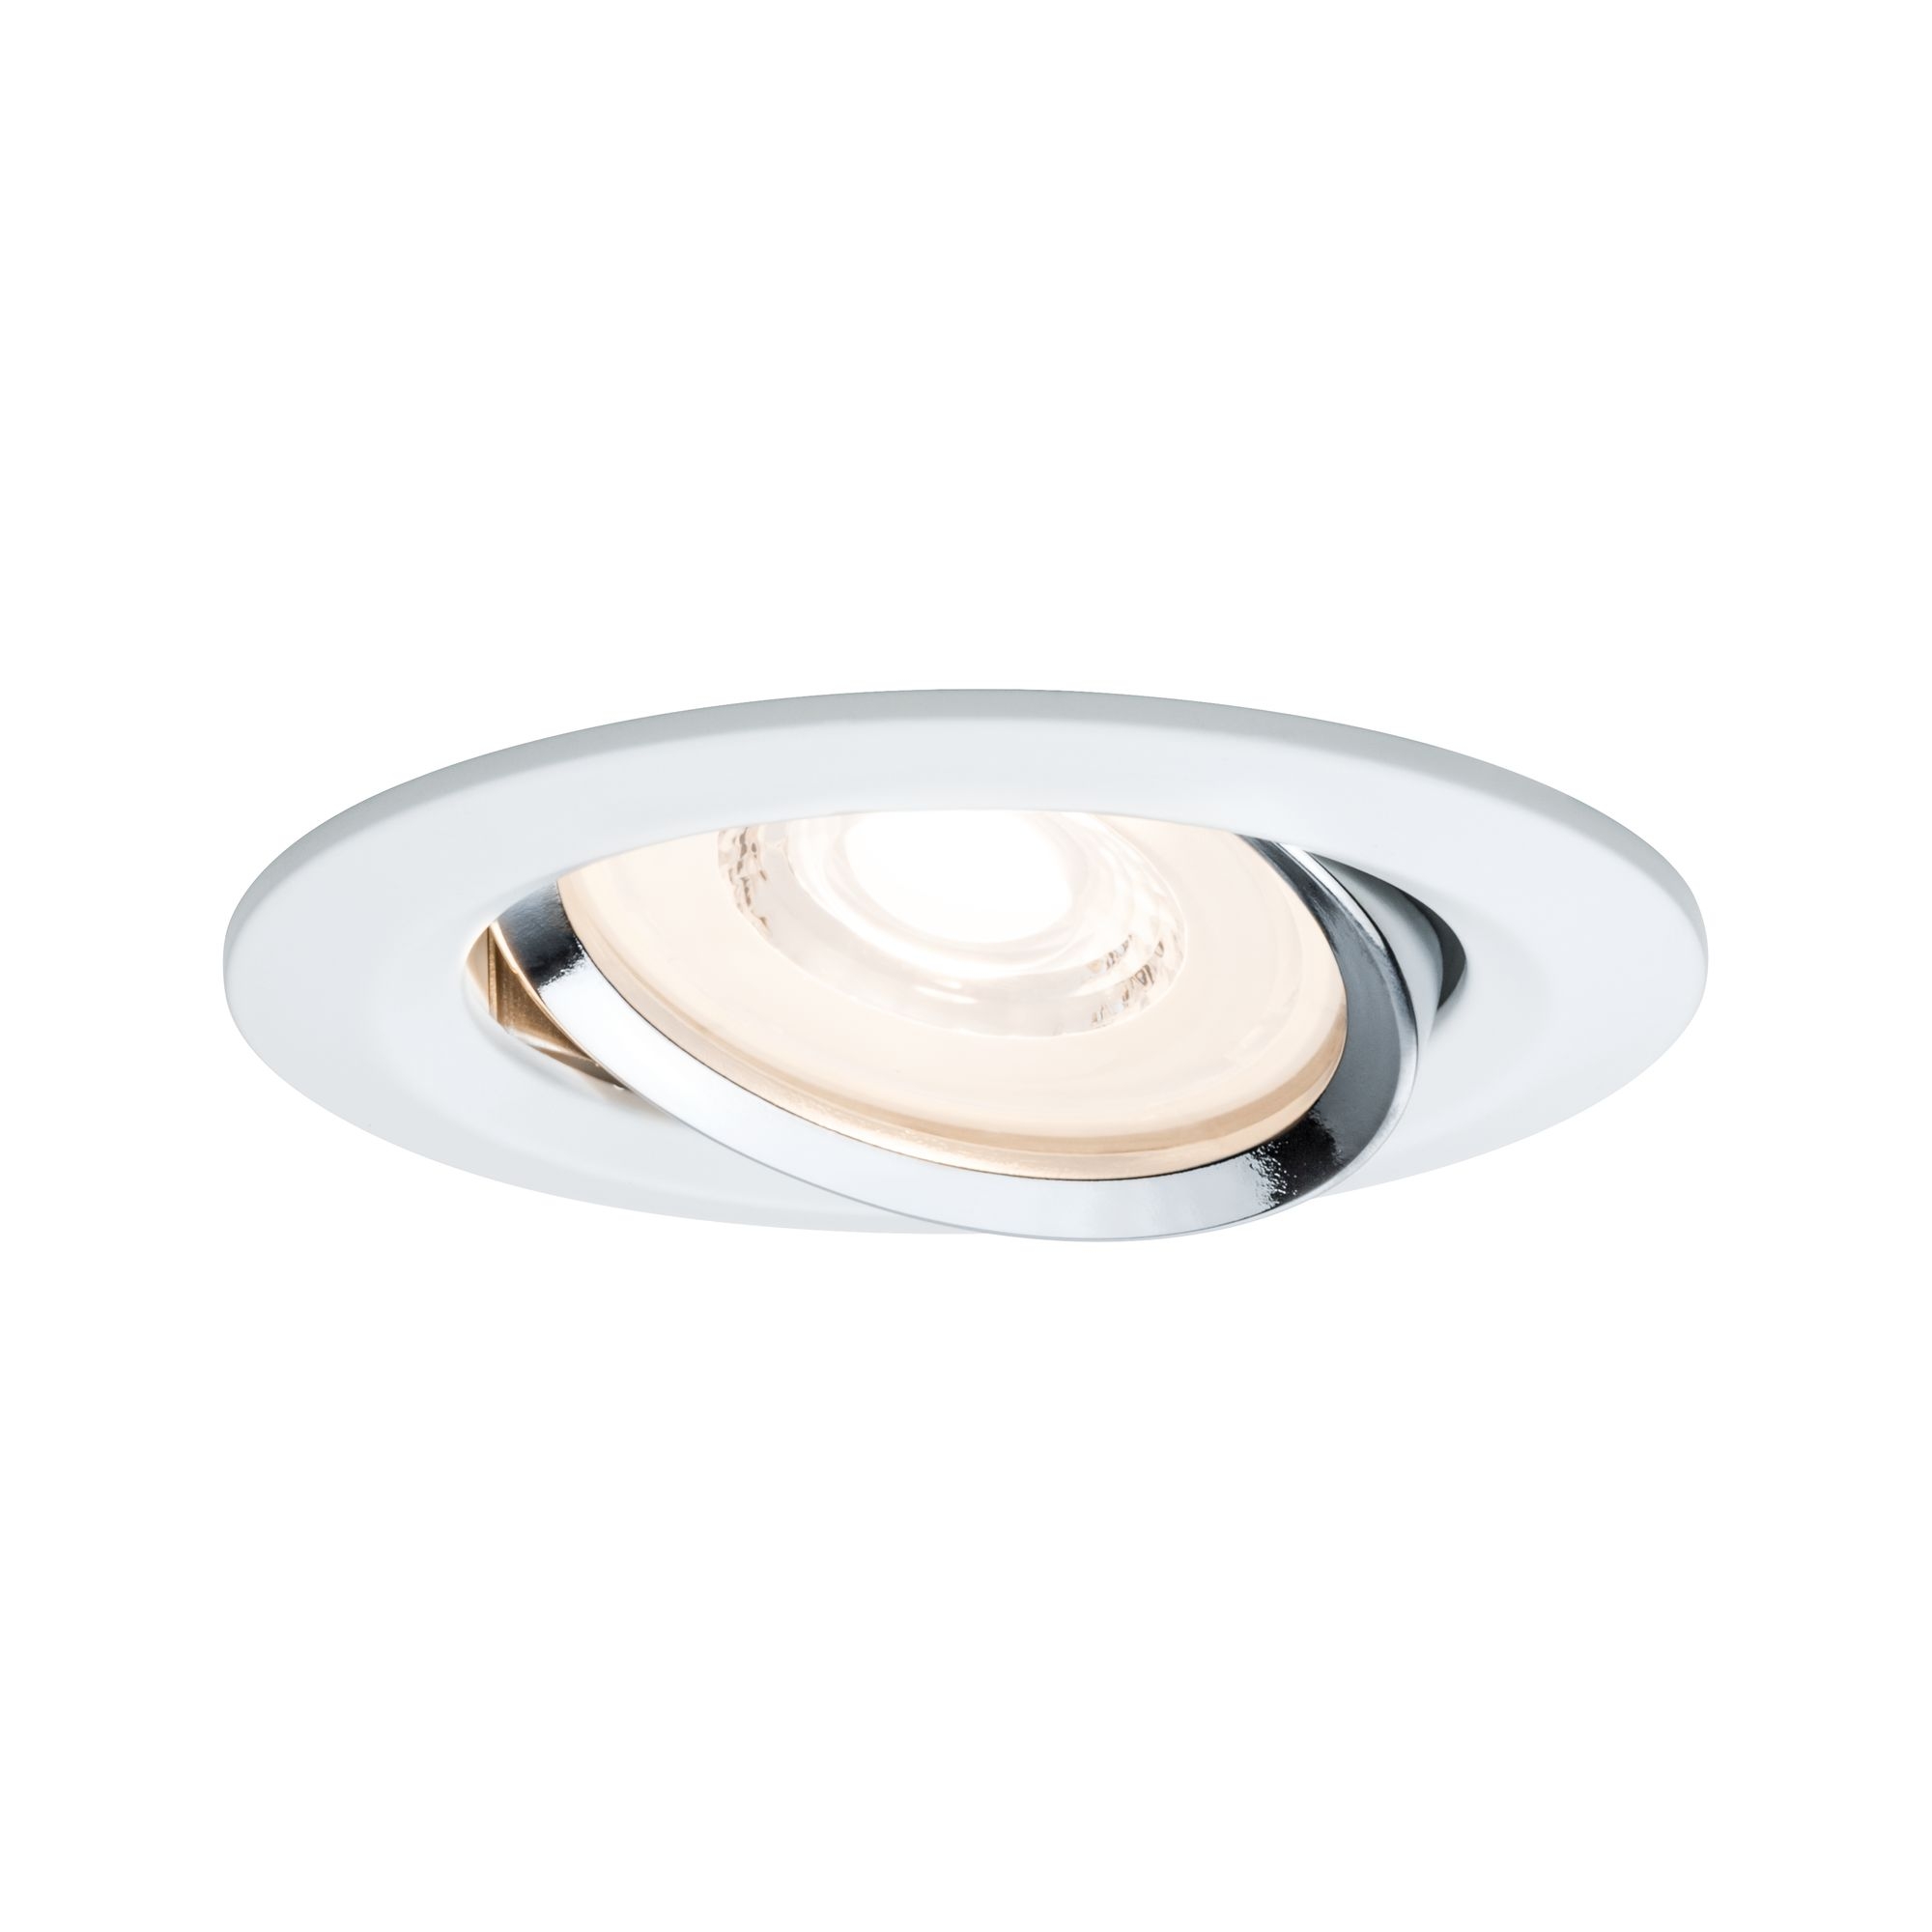 LED-inbouwlamp Reflector Coin 6,8 W wit